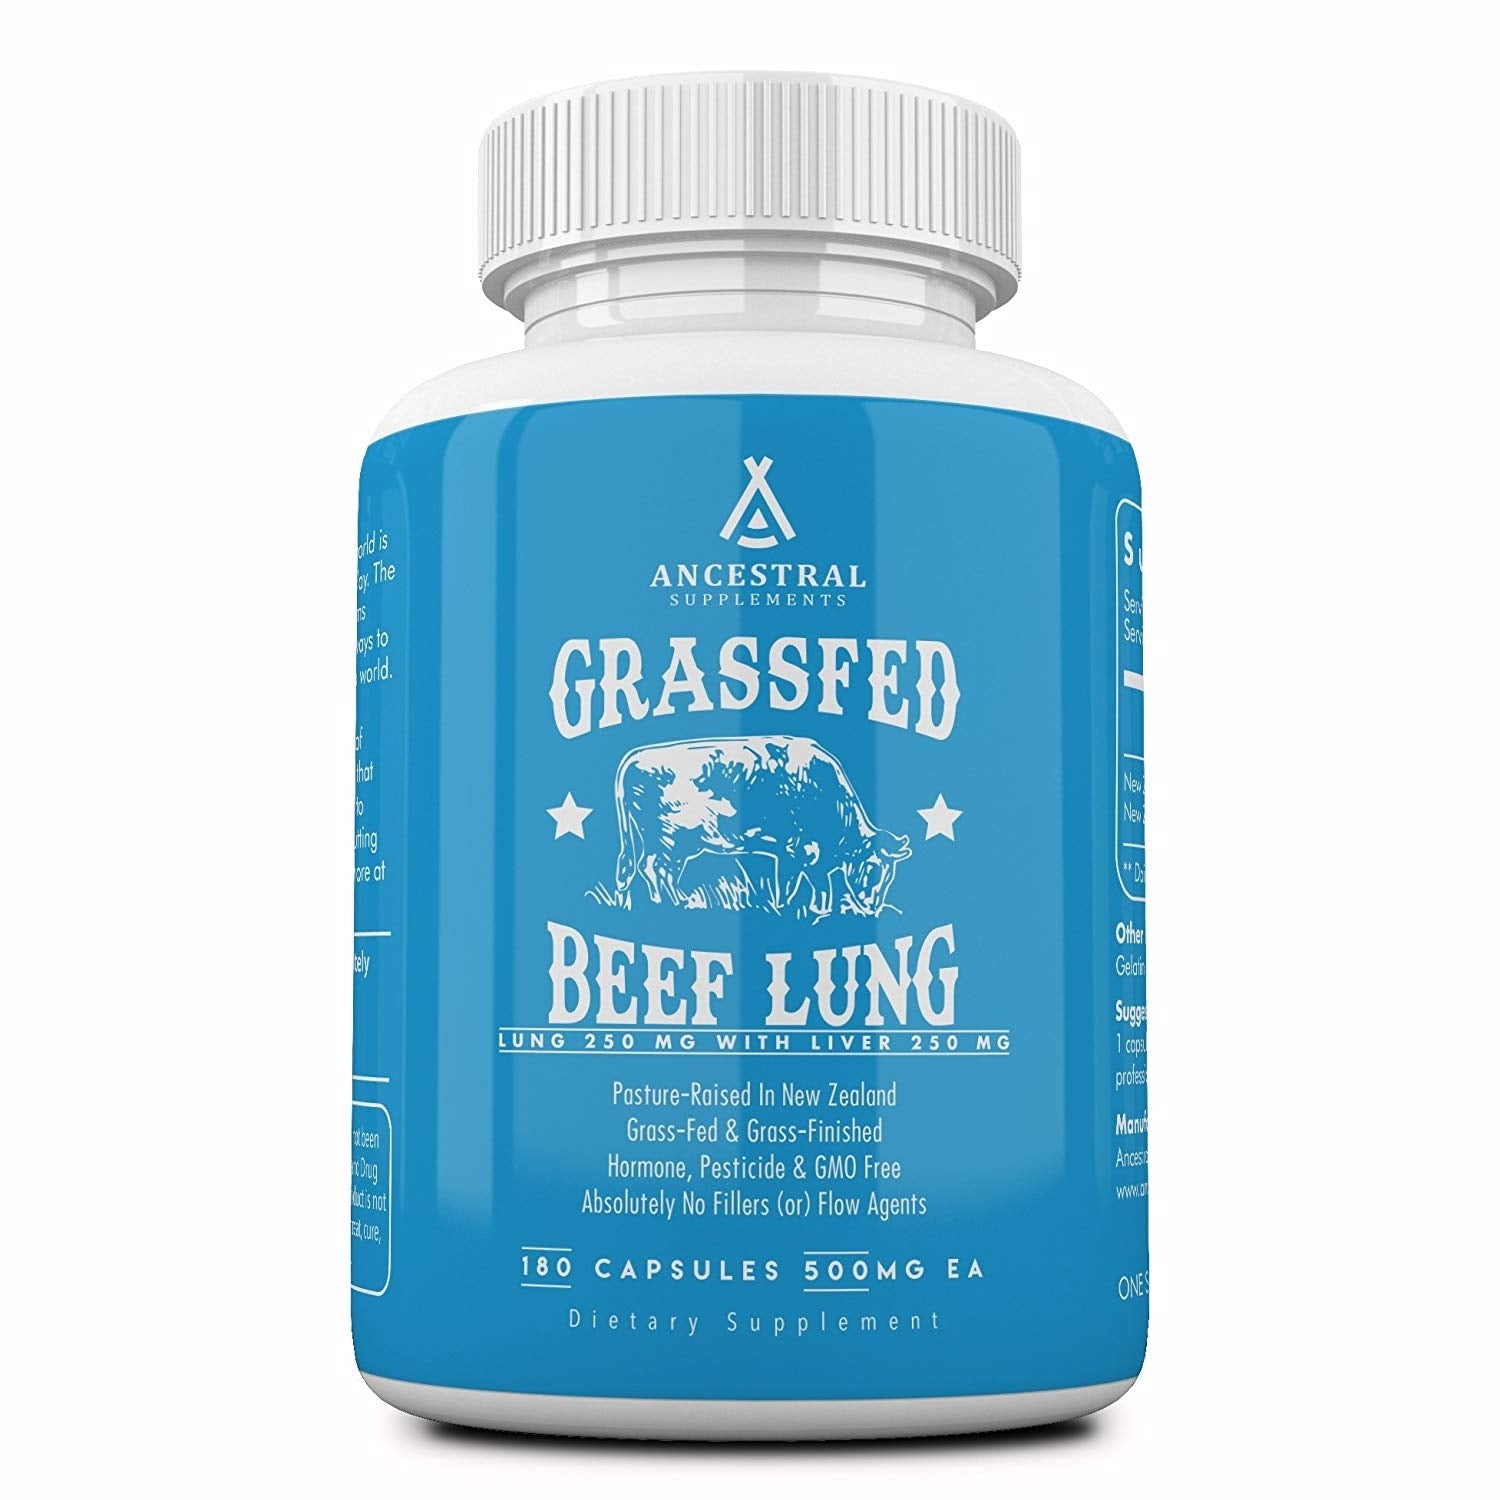 Grassfed Beef Lung - 180 capsules